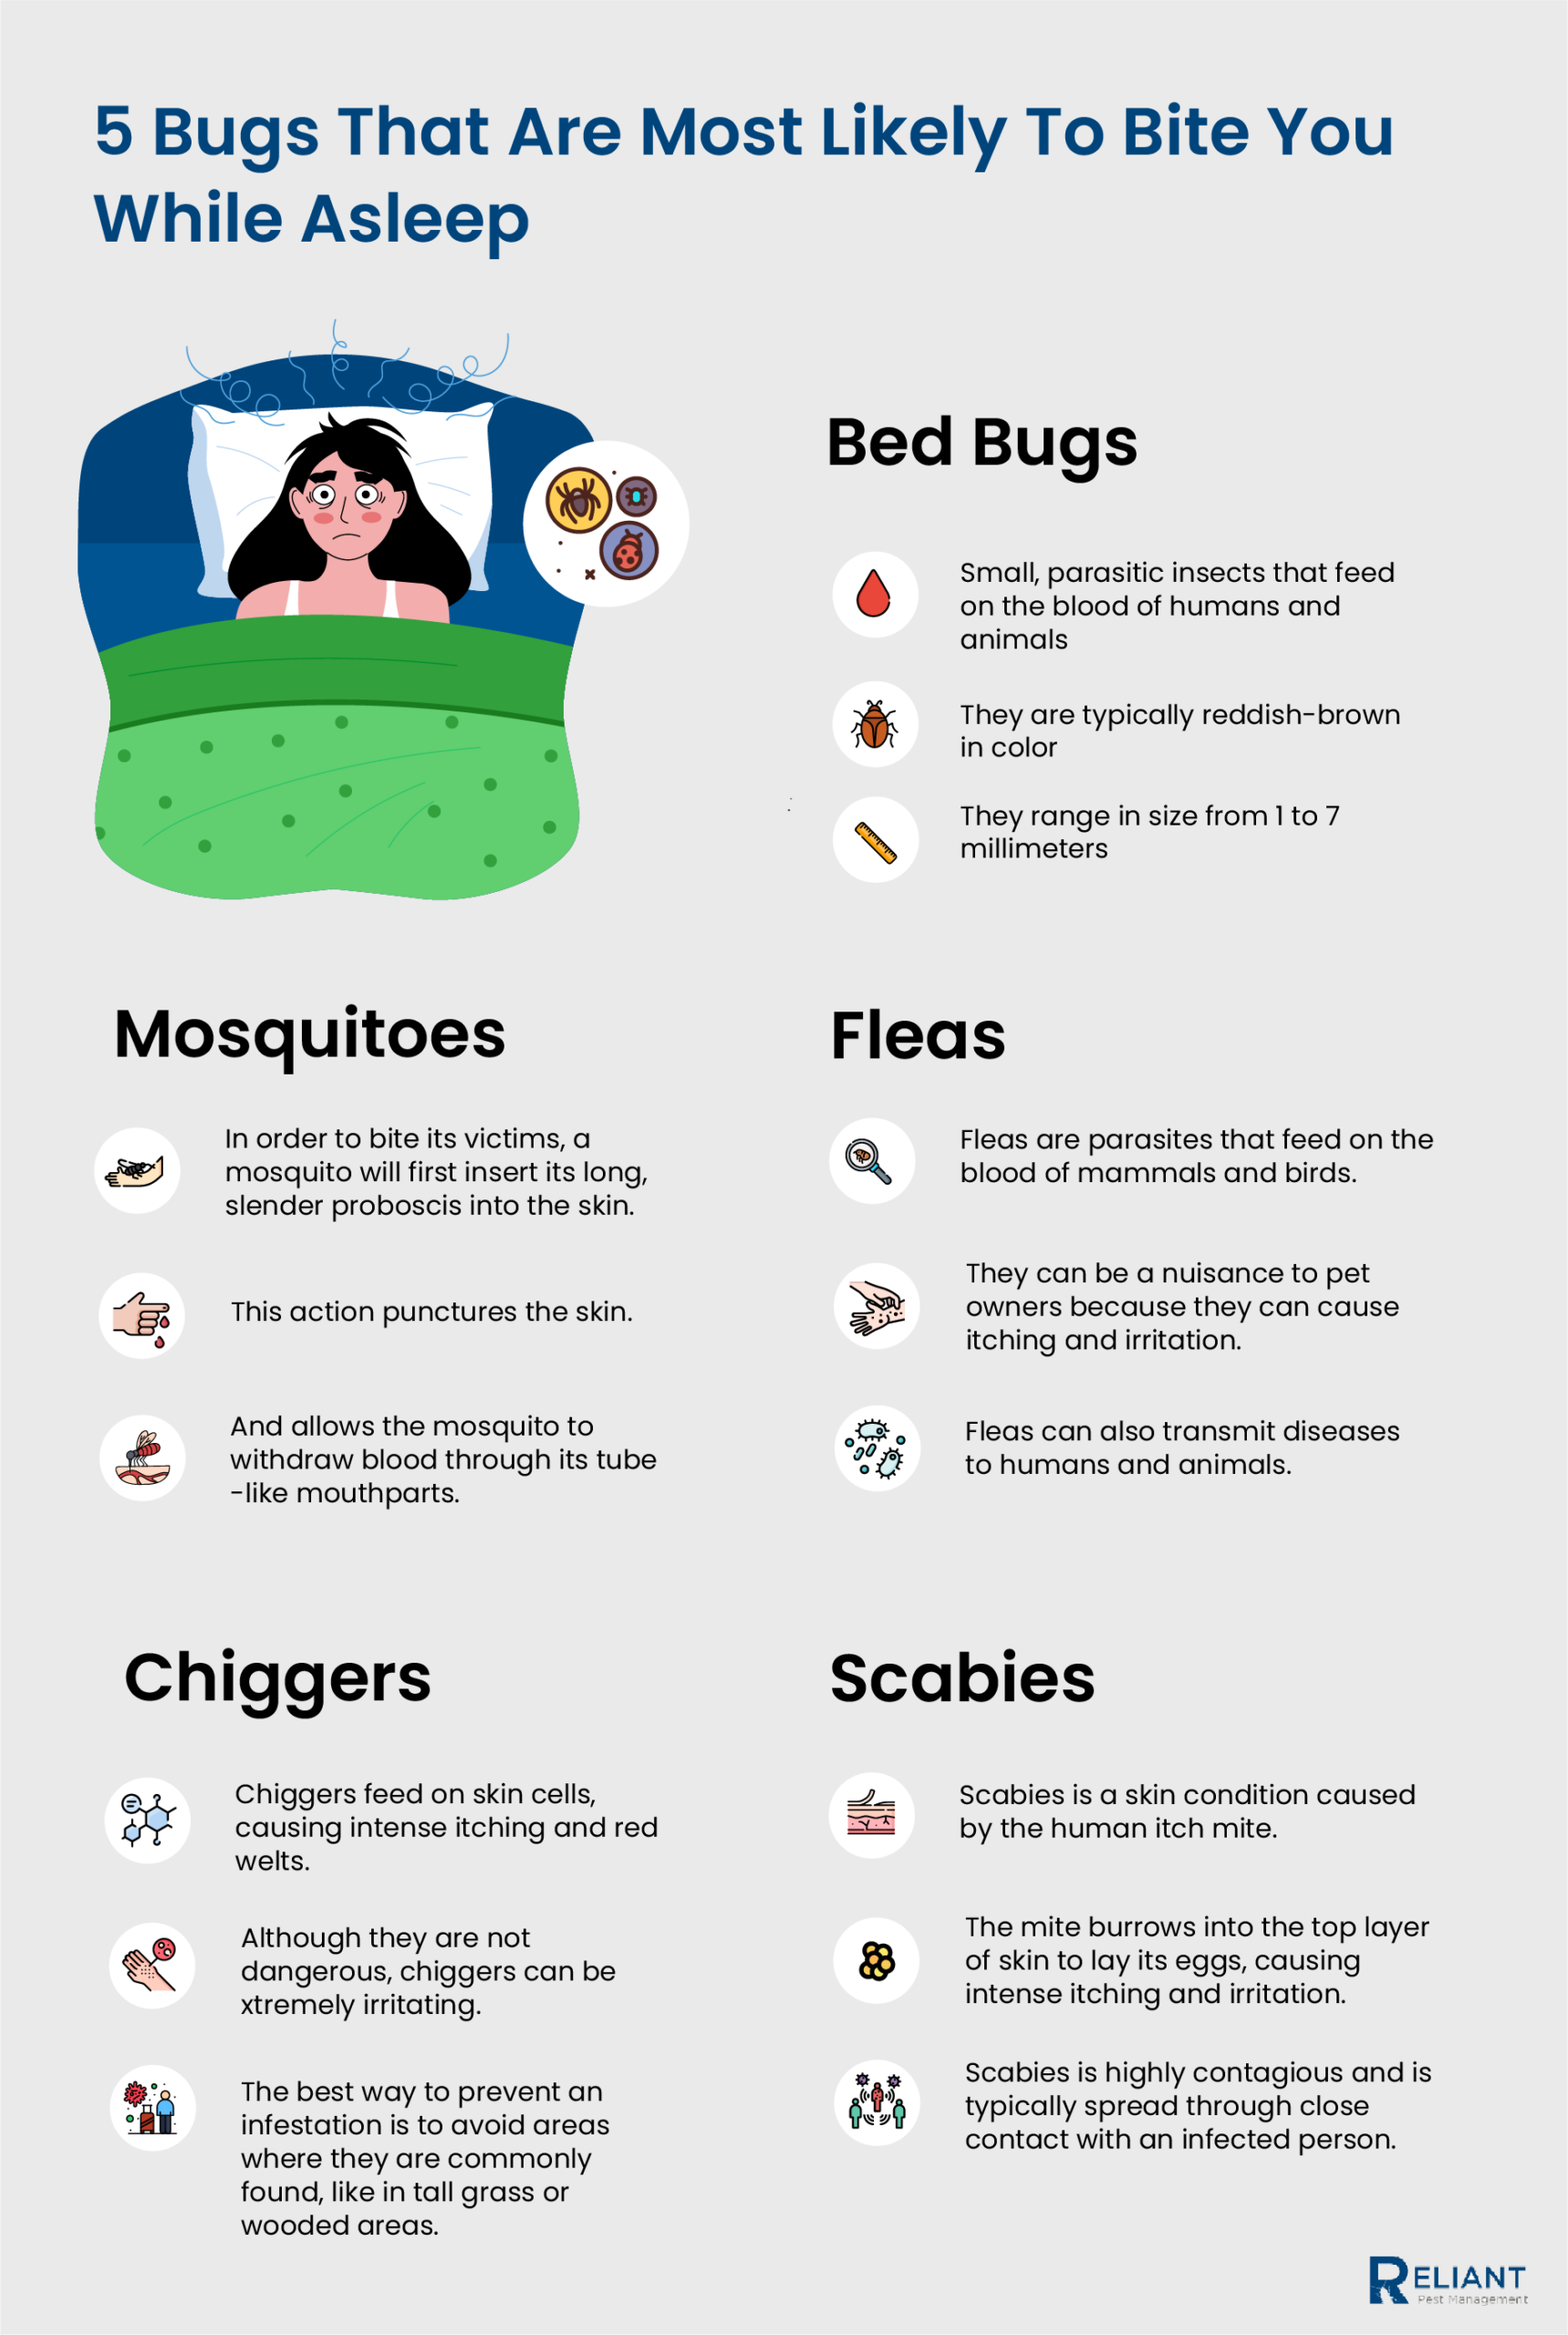 bugs that bite while asleep infographic